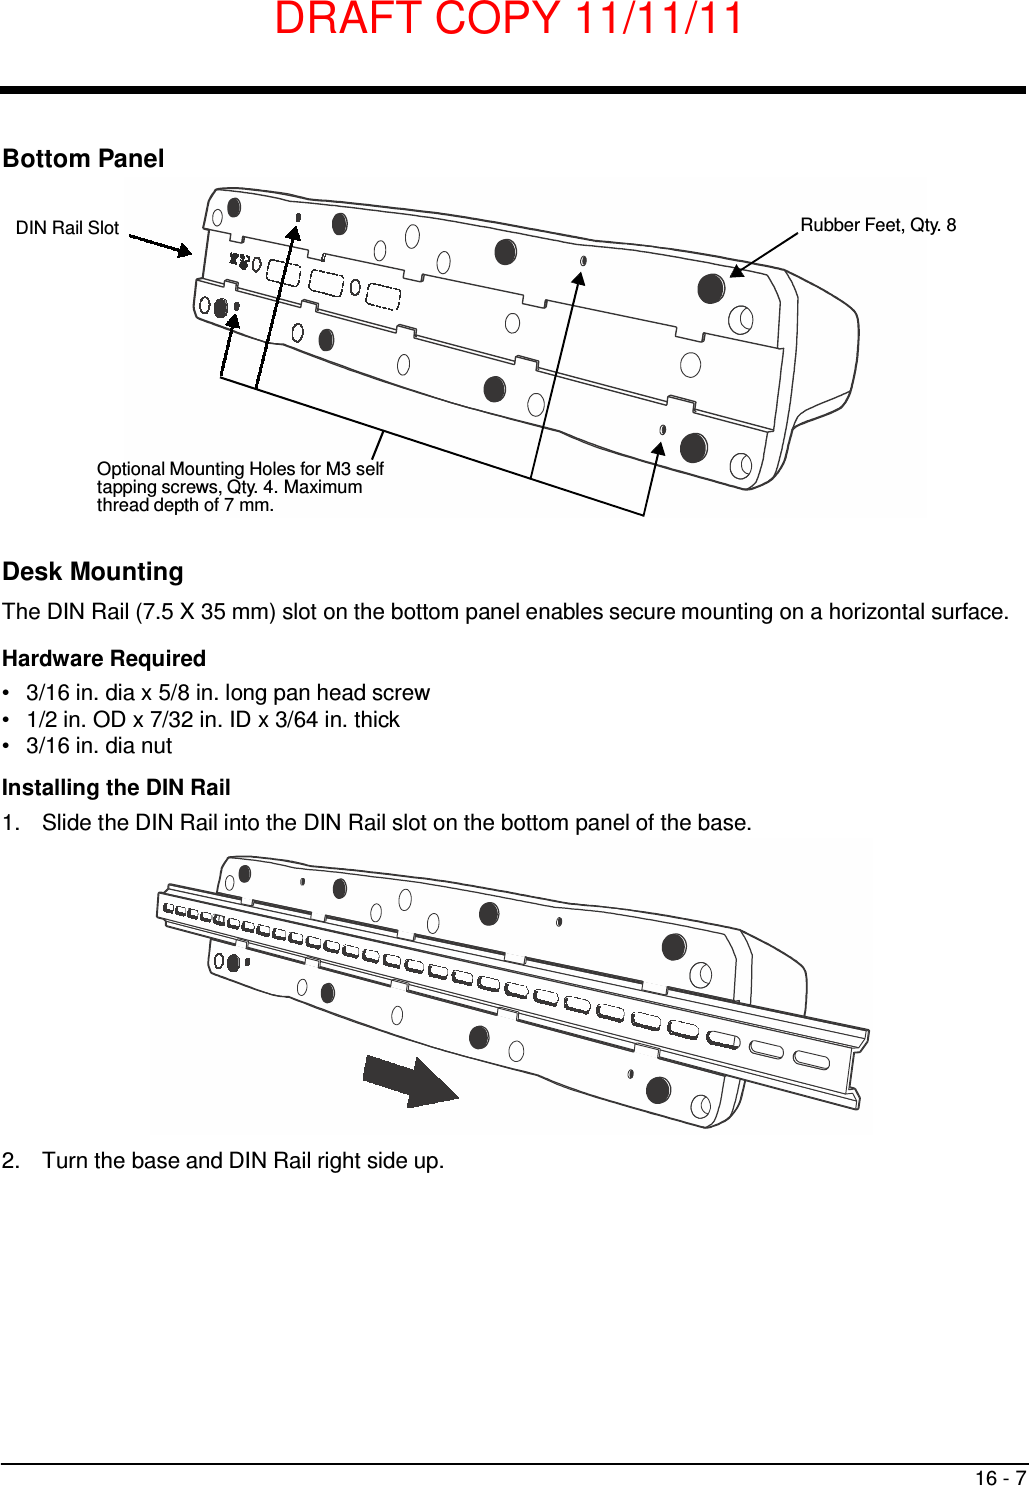 DRAFT COPY 11/11/11 16 - 7        Bottom Panel   DIN Rail Slot  Rubber Feet, Qty. 8            Optional Mounting Holes for M3 self tapping screws, Qty. 4. Maximum thread depth of 7 mm.   Desk Mounting  The DIN Rail (7.5 X 35 mm) slot on the bottom panel enables secure mounting on a horizontal surface.  Hardware Required •   3/16 in. dia x 5/8 in. long pan head screw •   1/2 in. OD x 7/32 in. ID x 3/64 in. thick •   3/16 in. dia nut  Installing the DIN Rail 1.  Slide the DIN Rail into the DIN Rail slot on the bottom panel of the base.                2.  Turn the base and DIN Rail right side up. 